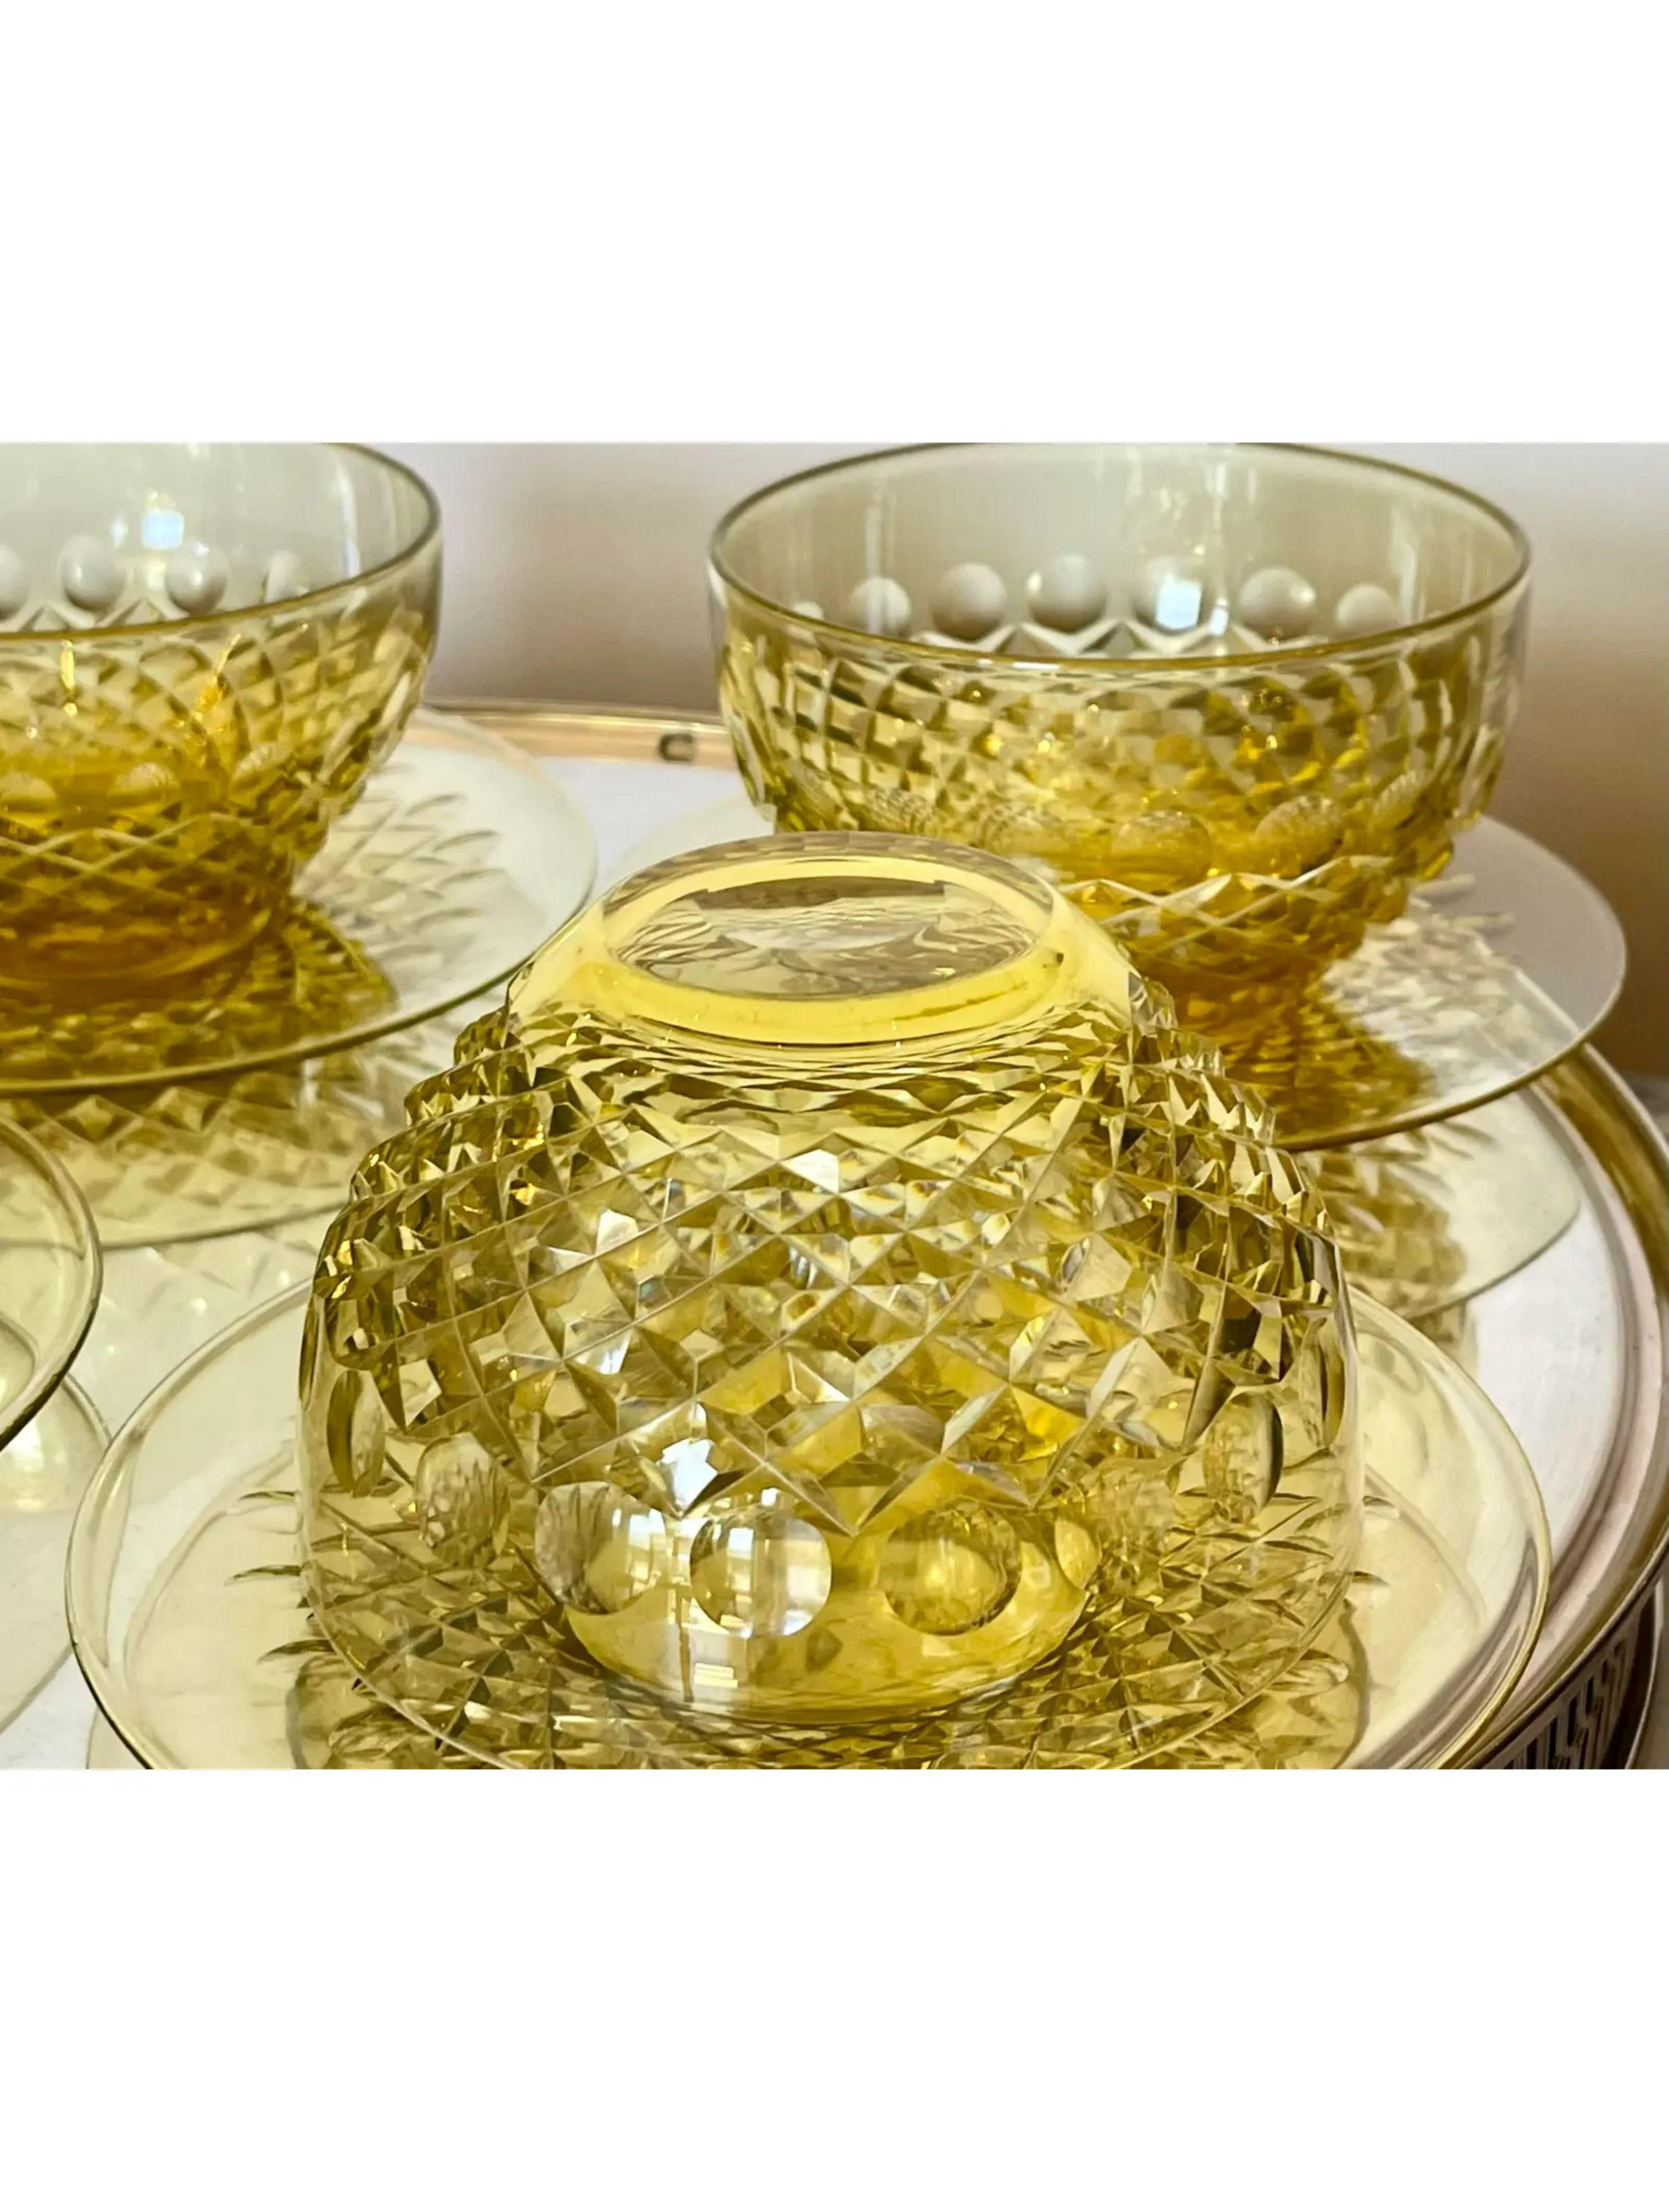 Art Deco Antique Frederick Carder for Steuben Yellow Crystal Bowls & Underplates 8 Pc Set For Sale